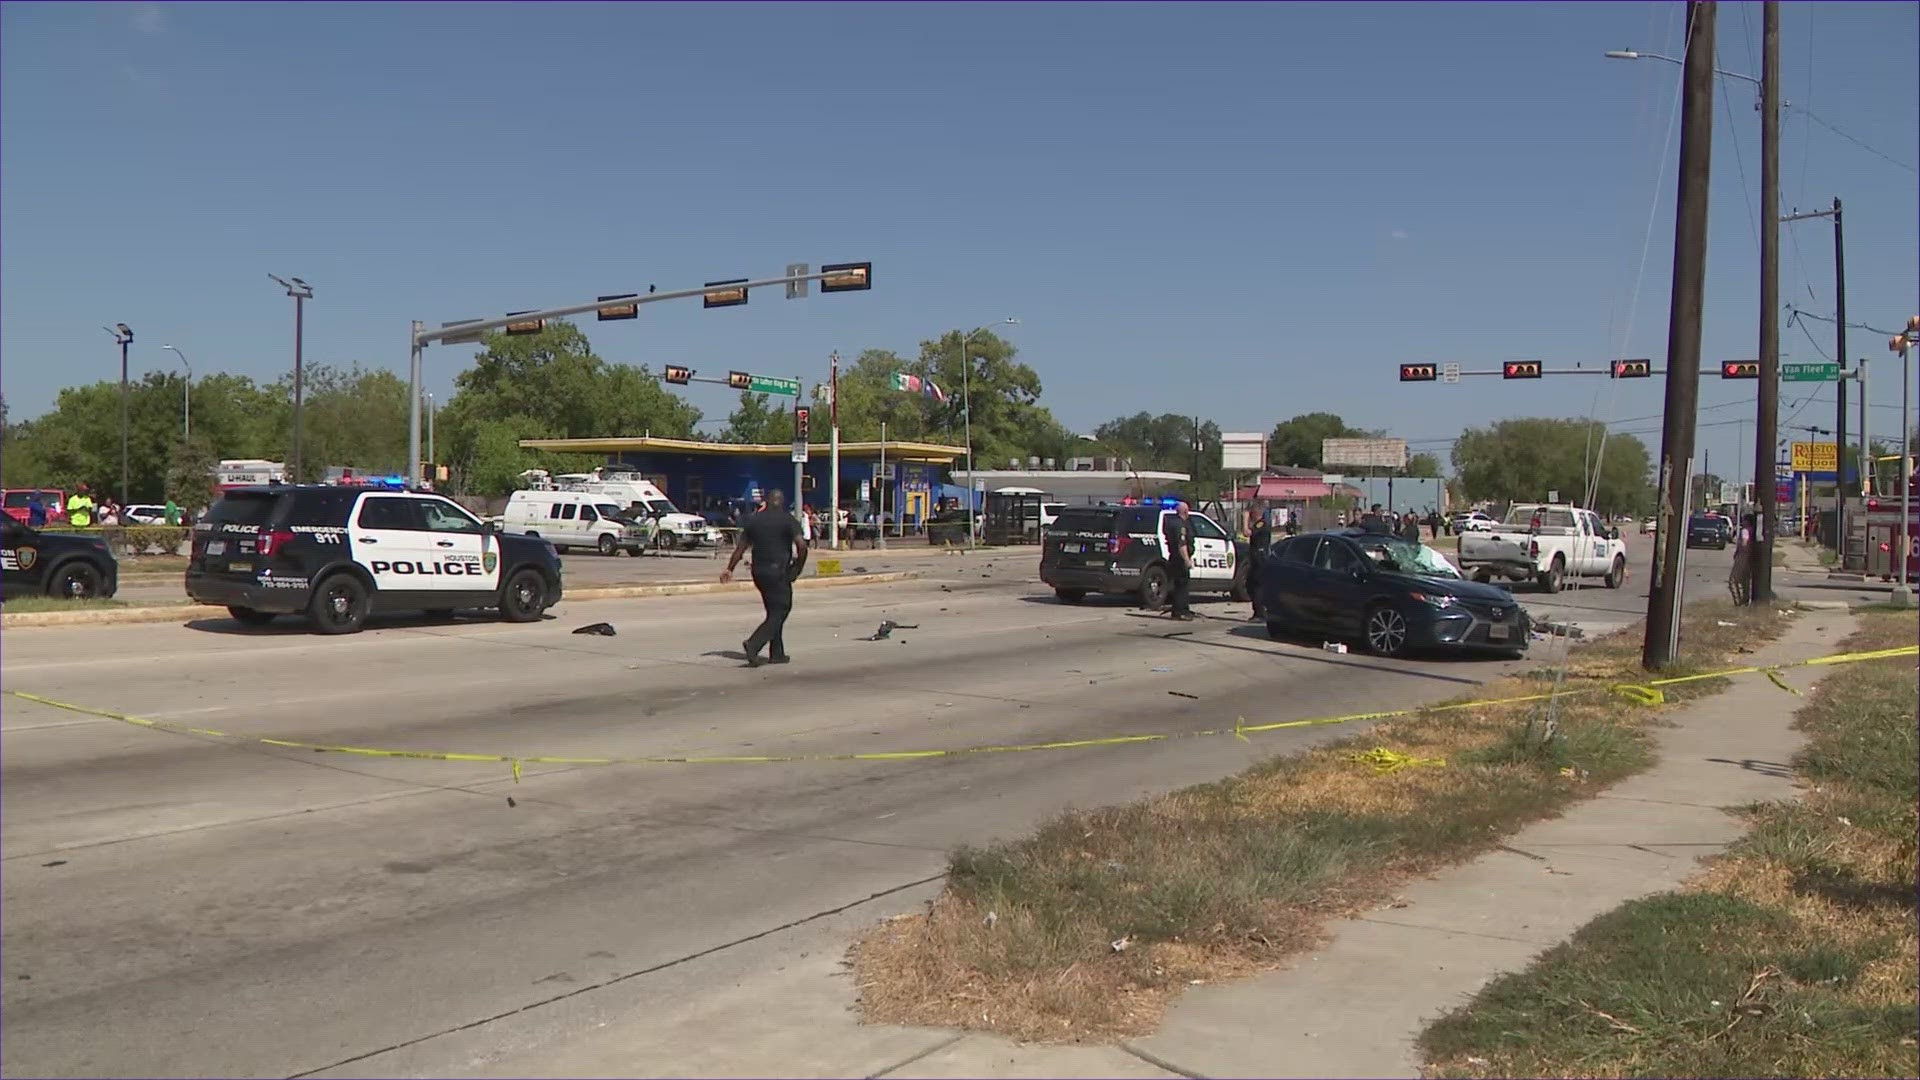 The woman killed in the crash was a 75-year-old woman who was the mother of an HPD sergeant.